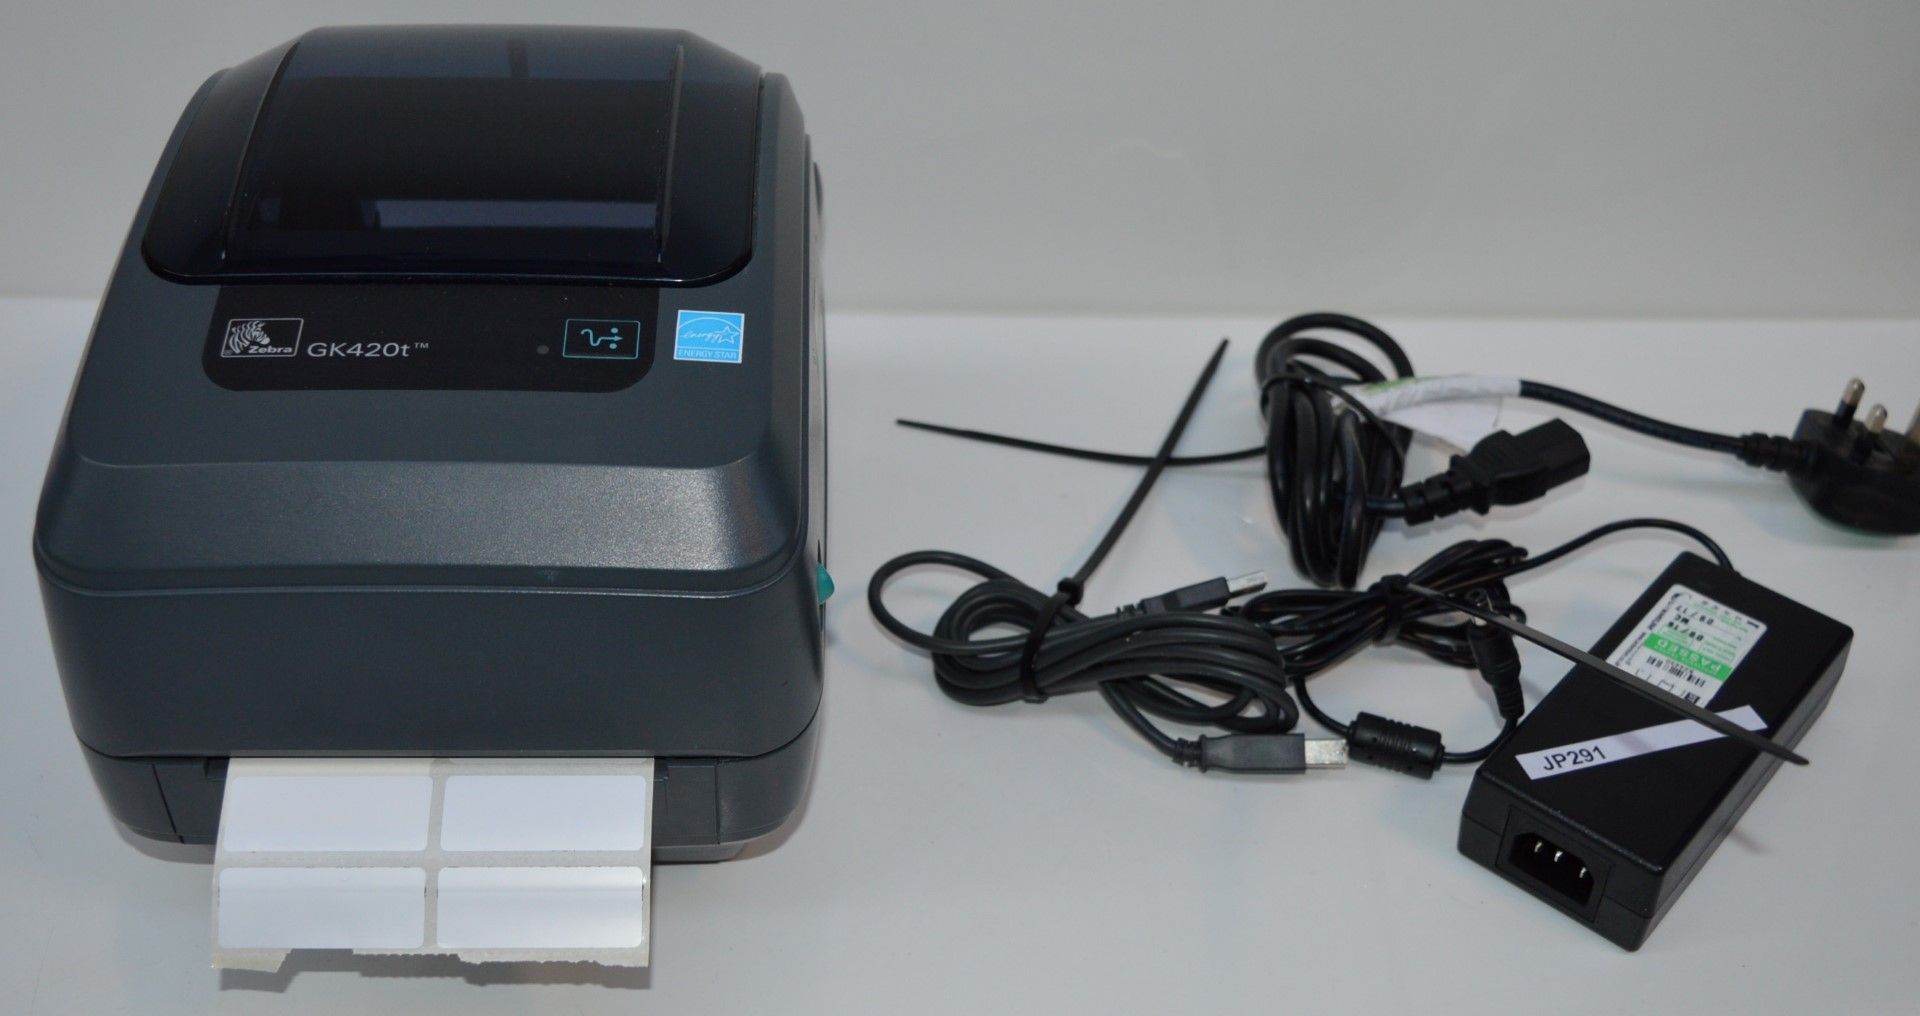 1 x Zebra GK420t Thermal Transfer Label Printer - USB & Serial Connectivity - Includes Cables -